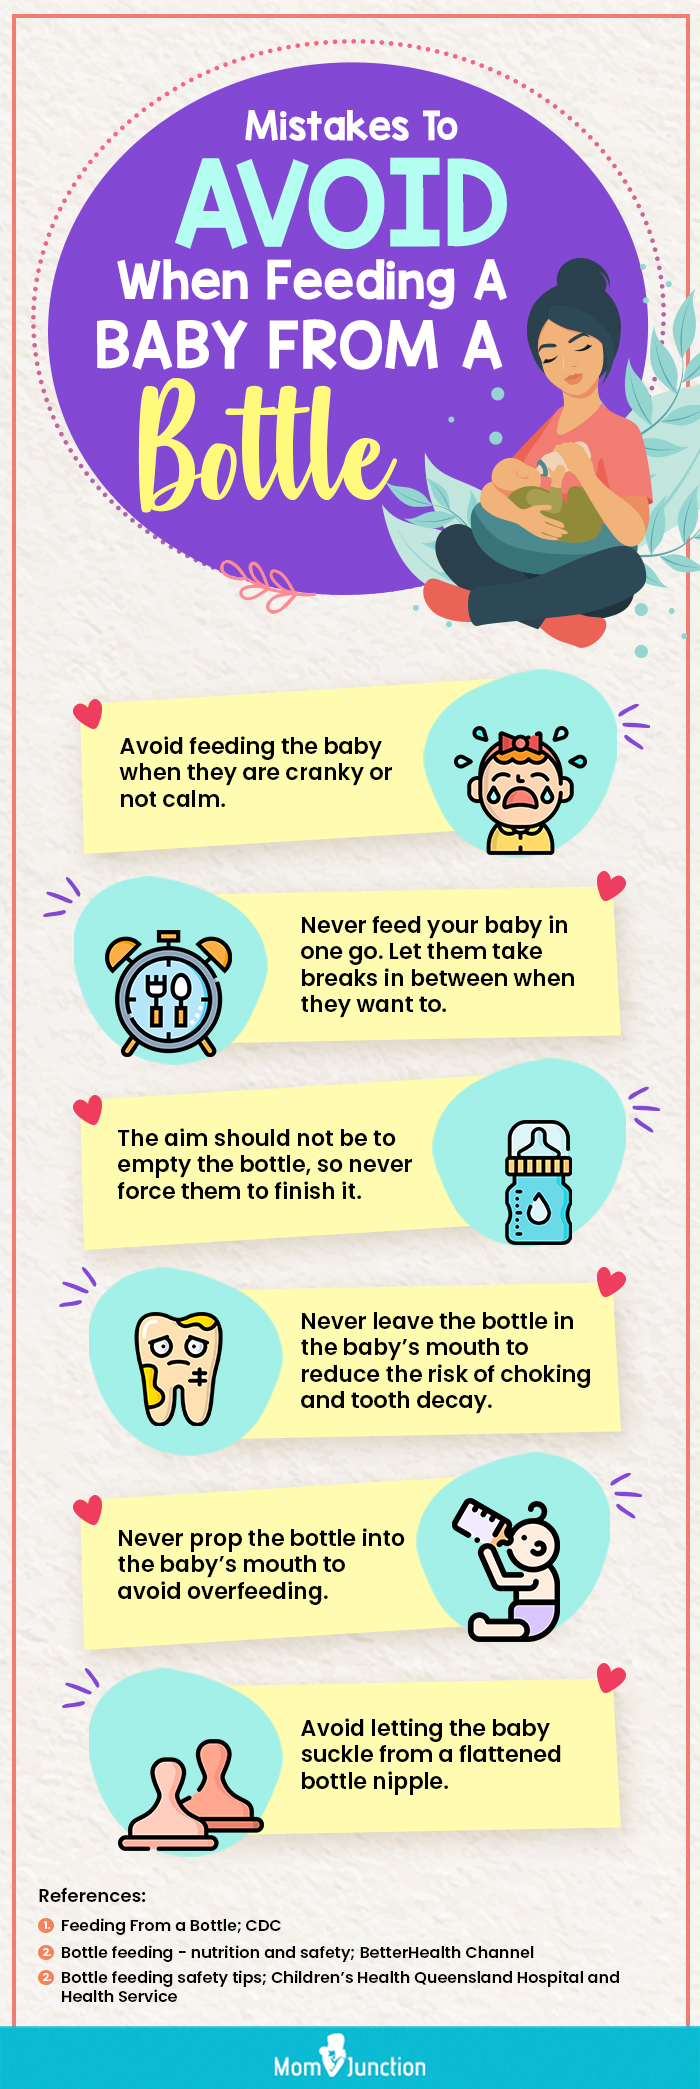 Mistakes To Avoid When Feeding A Baby From A Bottle 2(infographic)